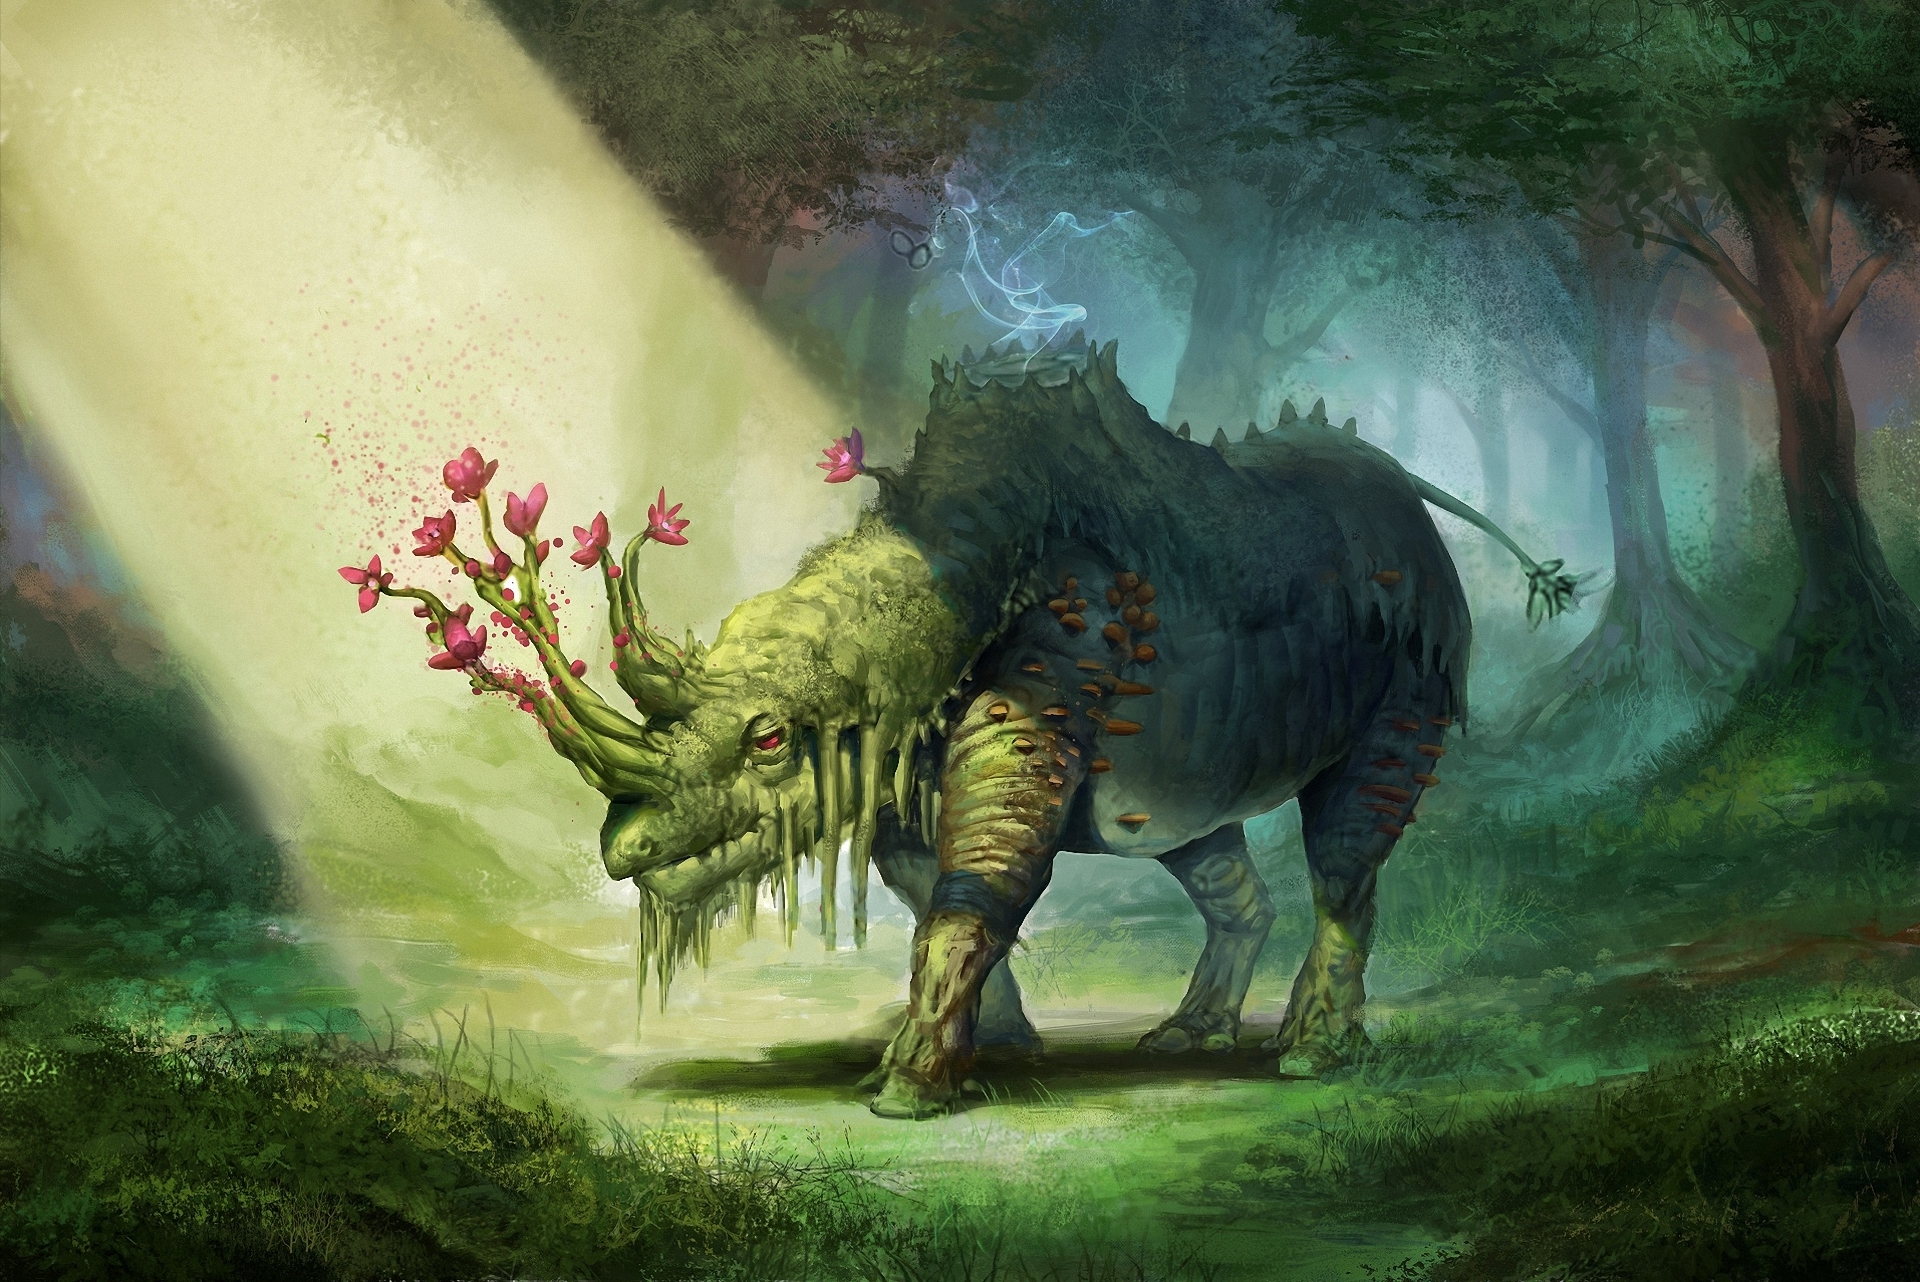 Moss Rhino by Logistic Puppet